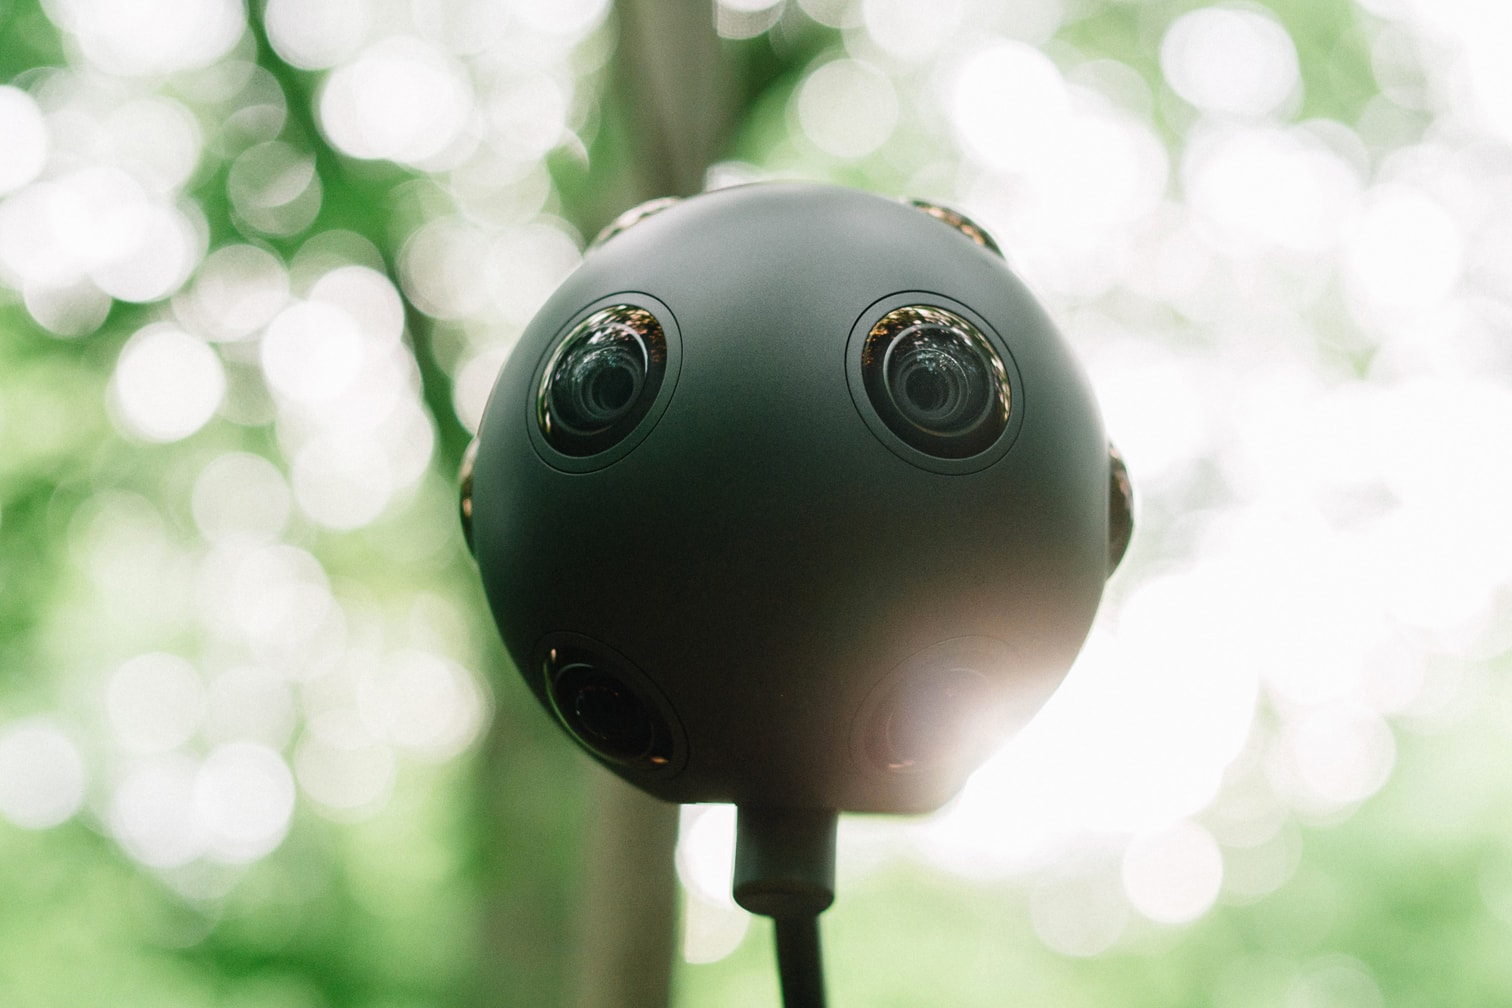 Nokia Ozo Spherical VR Camera Production Halted 360